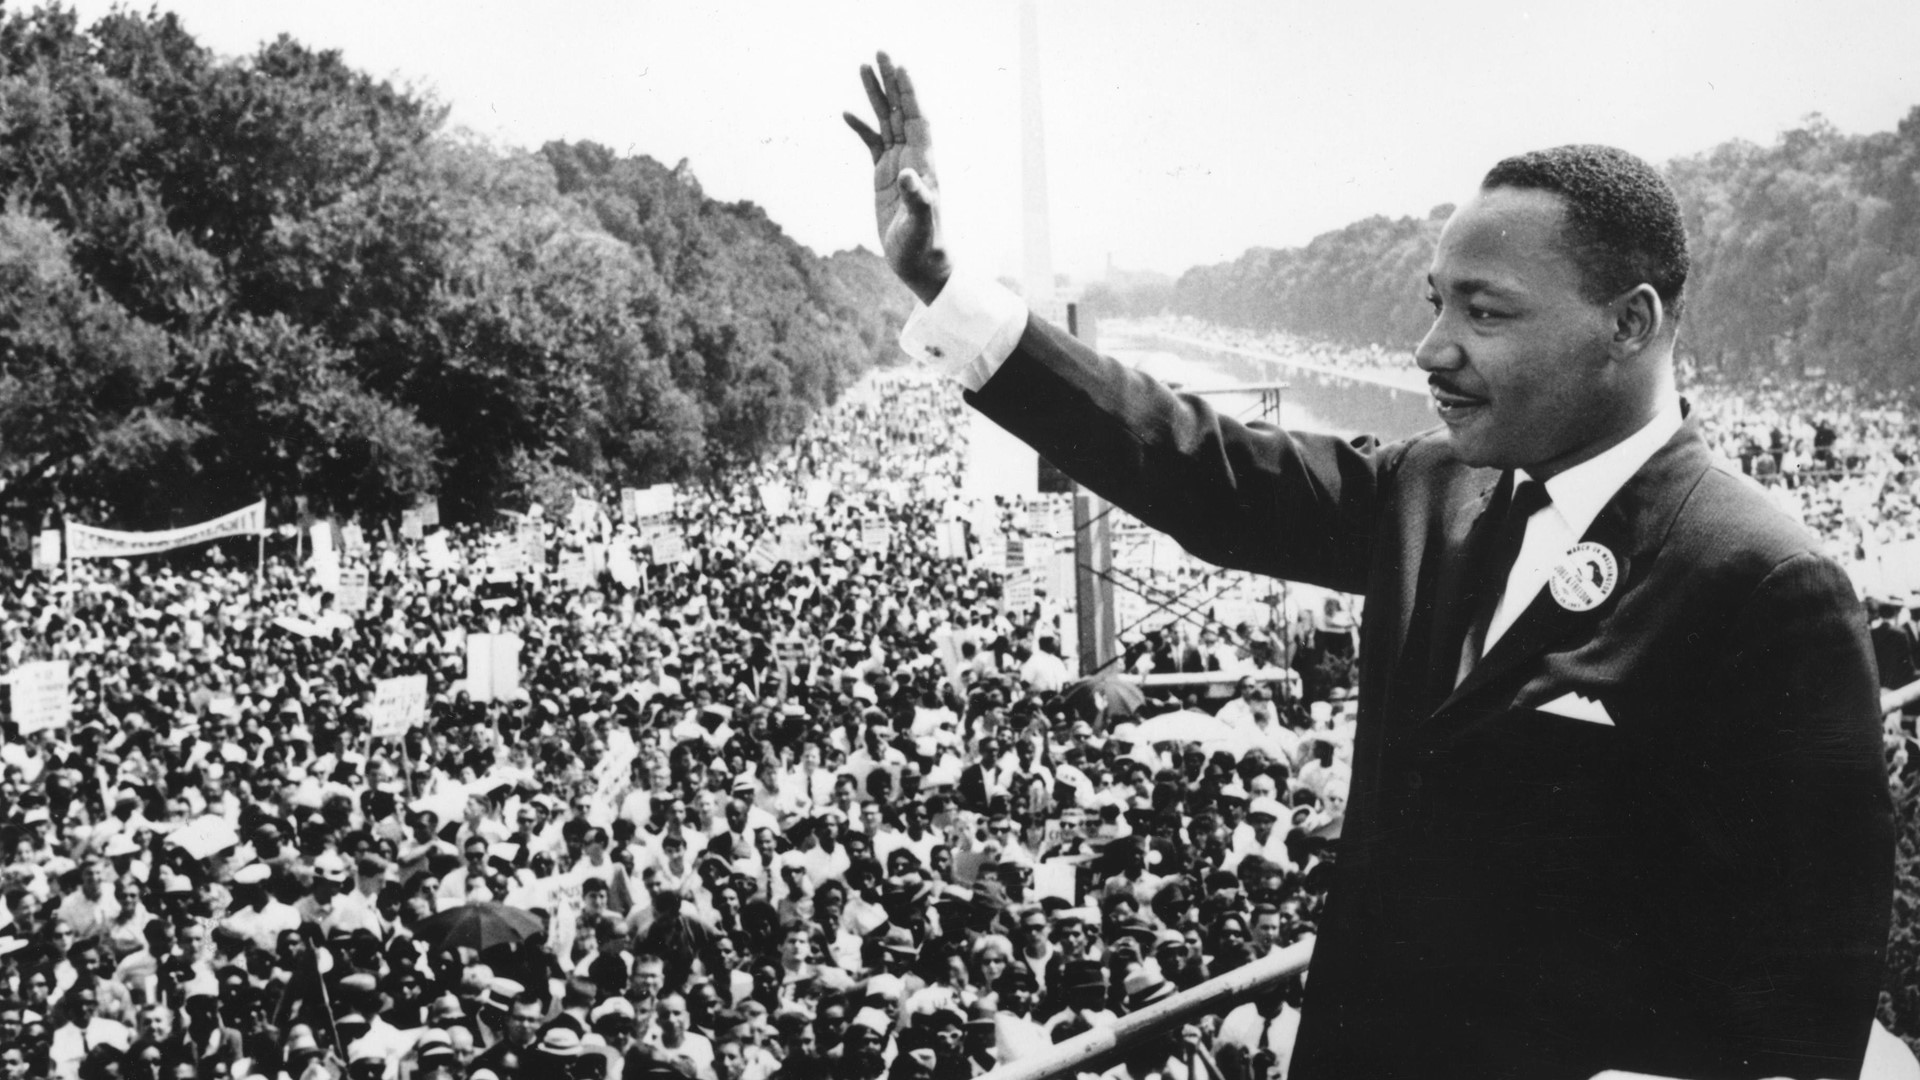 Congress first talked about creating a holiday in MLK's honor in 1968, but it wasn't passed until 1983. Even then, some states combined it with Confederate holidays.